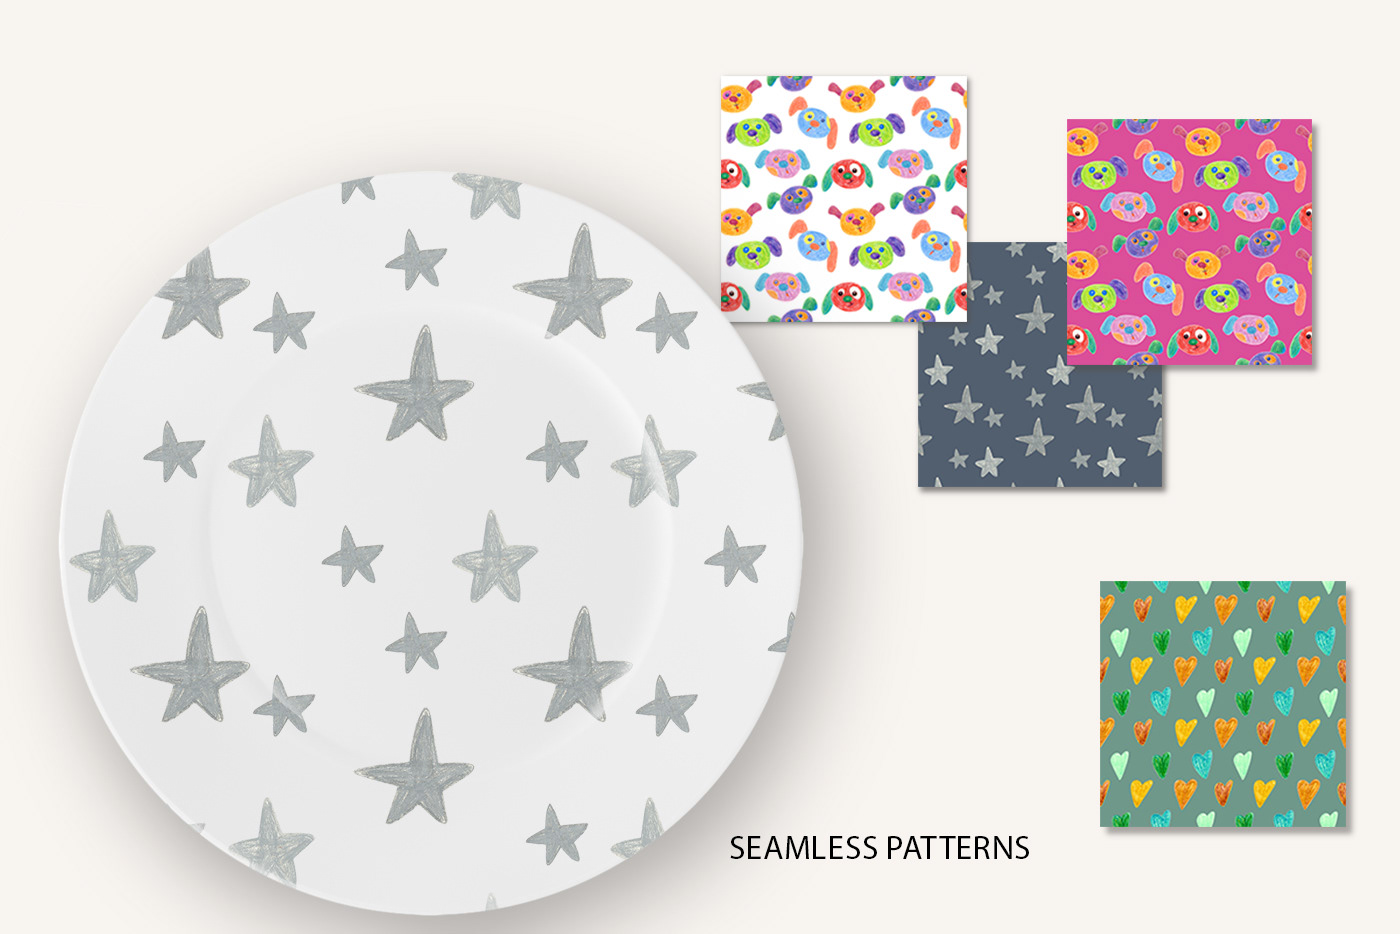 seamless pattern of hand drawn wax crayon dogs faces, hearts and stars